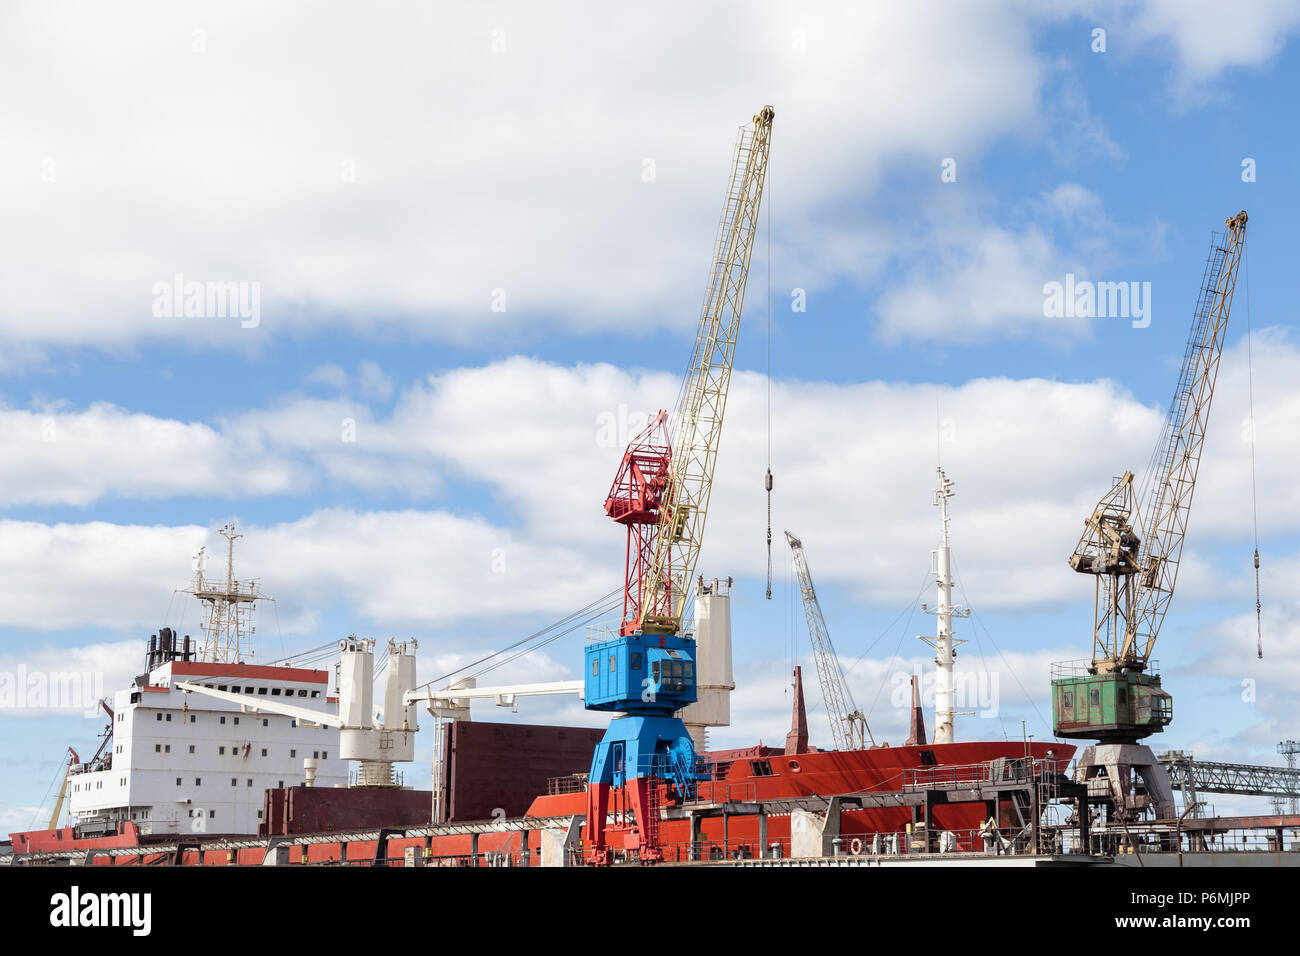 Port crane against a cloudy sky background Stock Photo